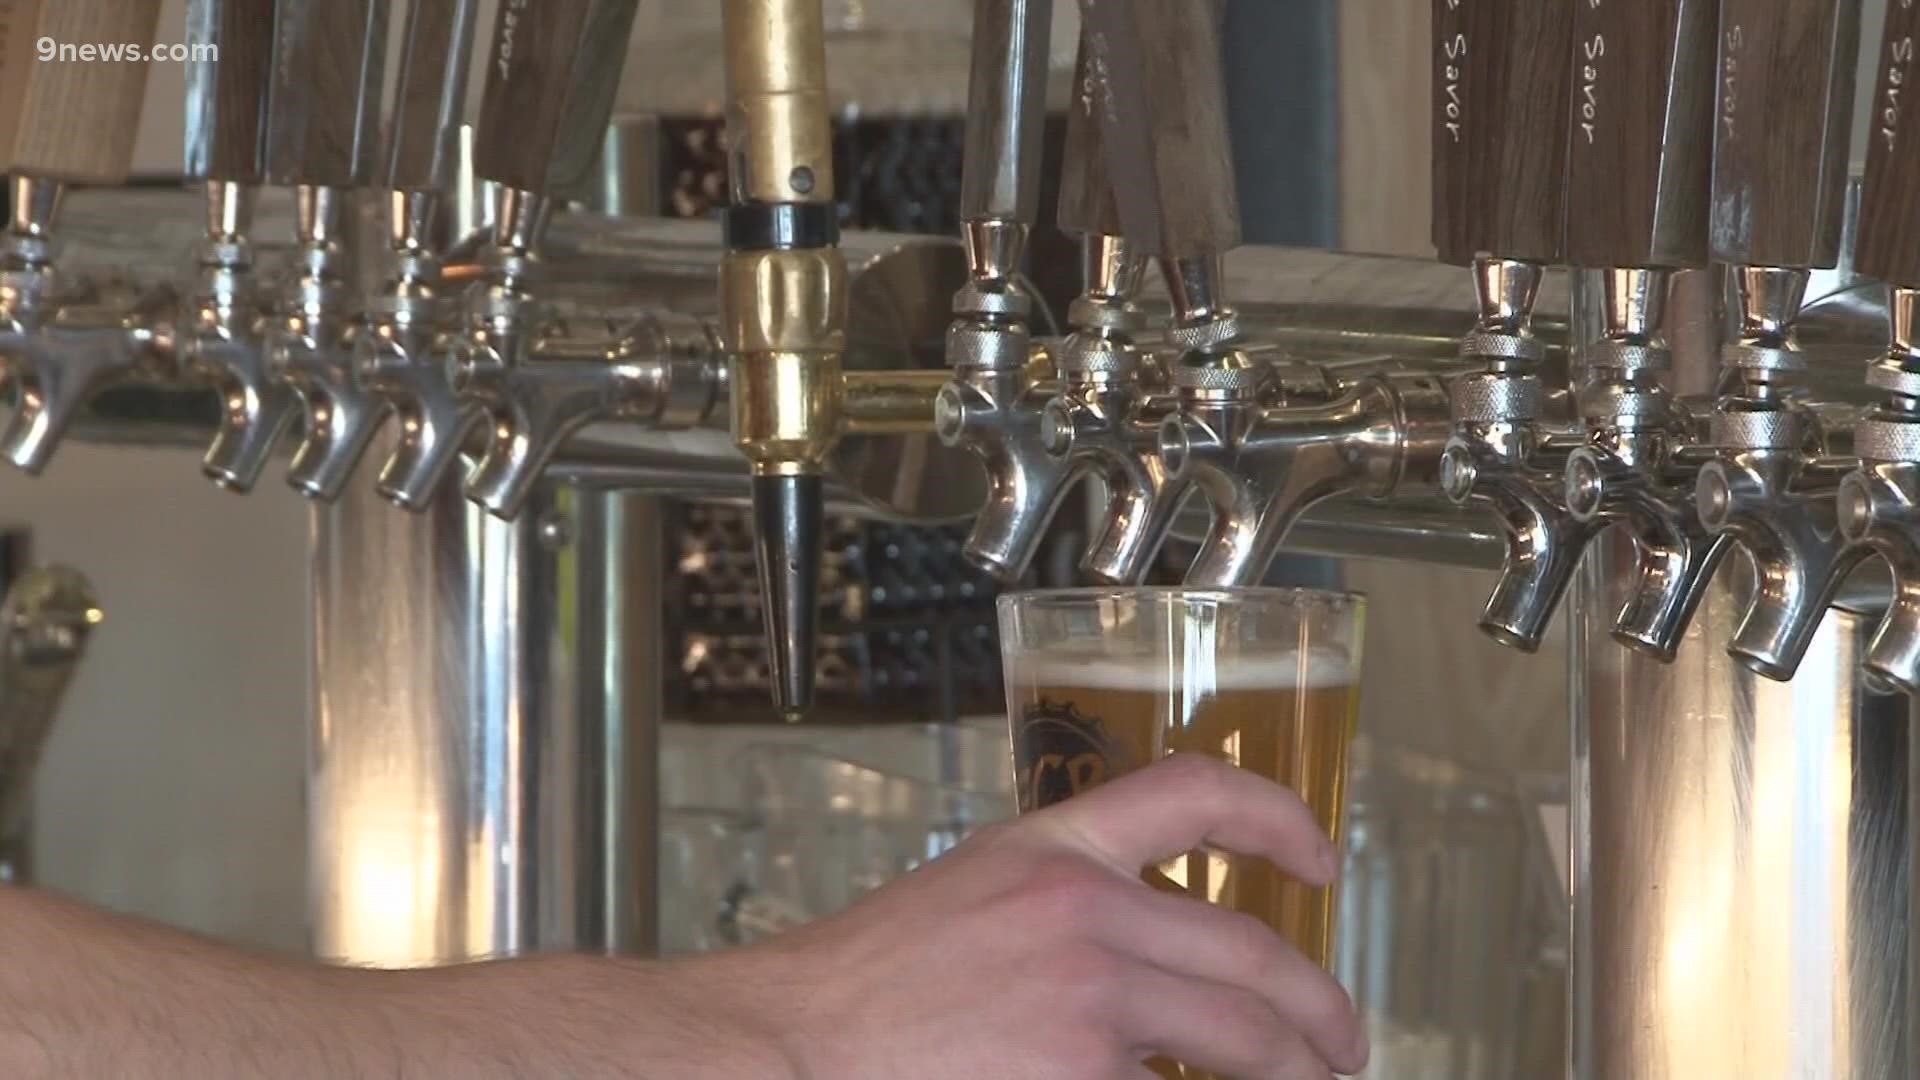 The legislature's going to consider allowing bars to either open at 5 a.m. or close at 4 a.m. Of course, the idea has opponents and supporters.